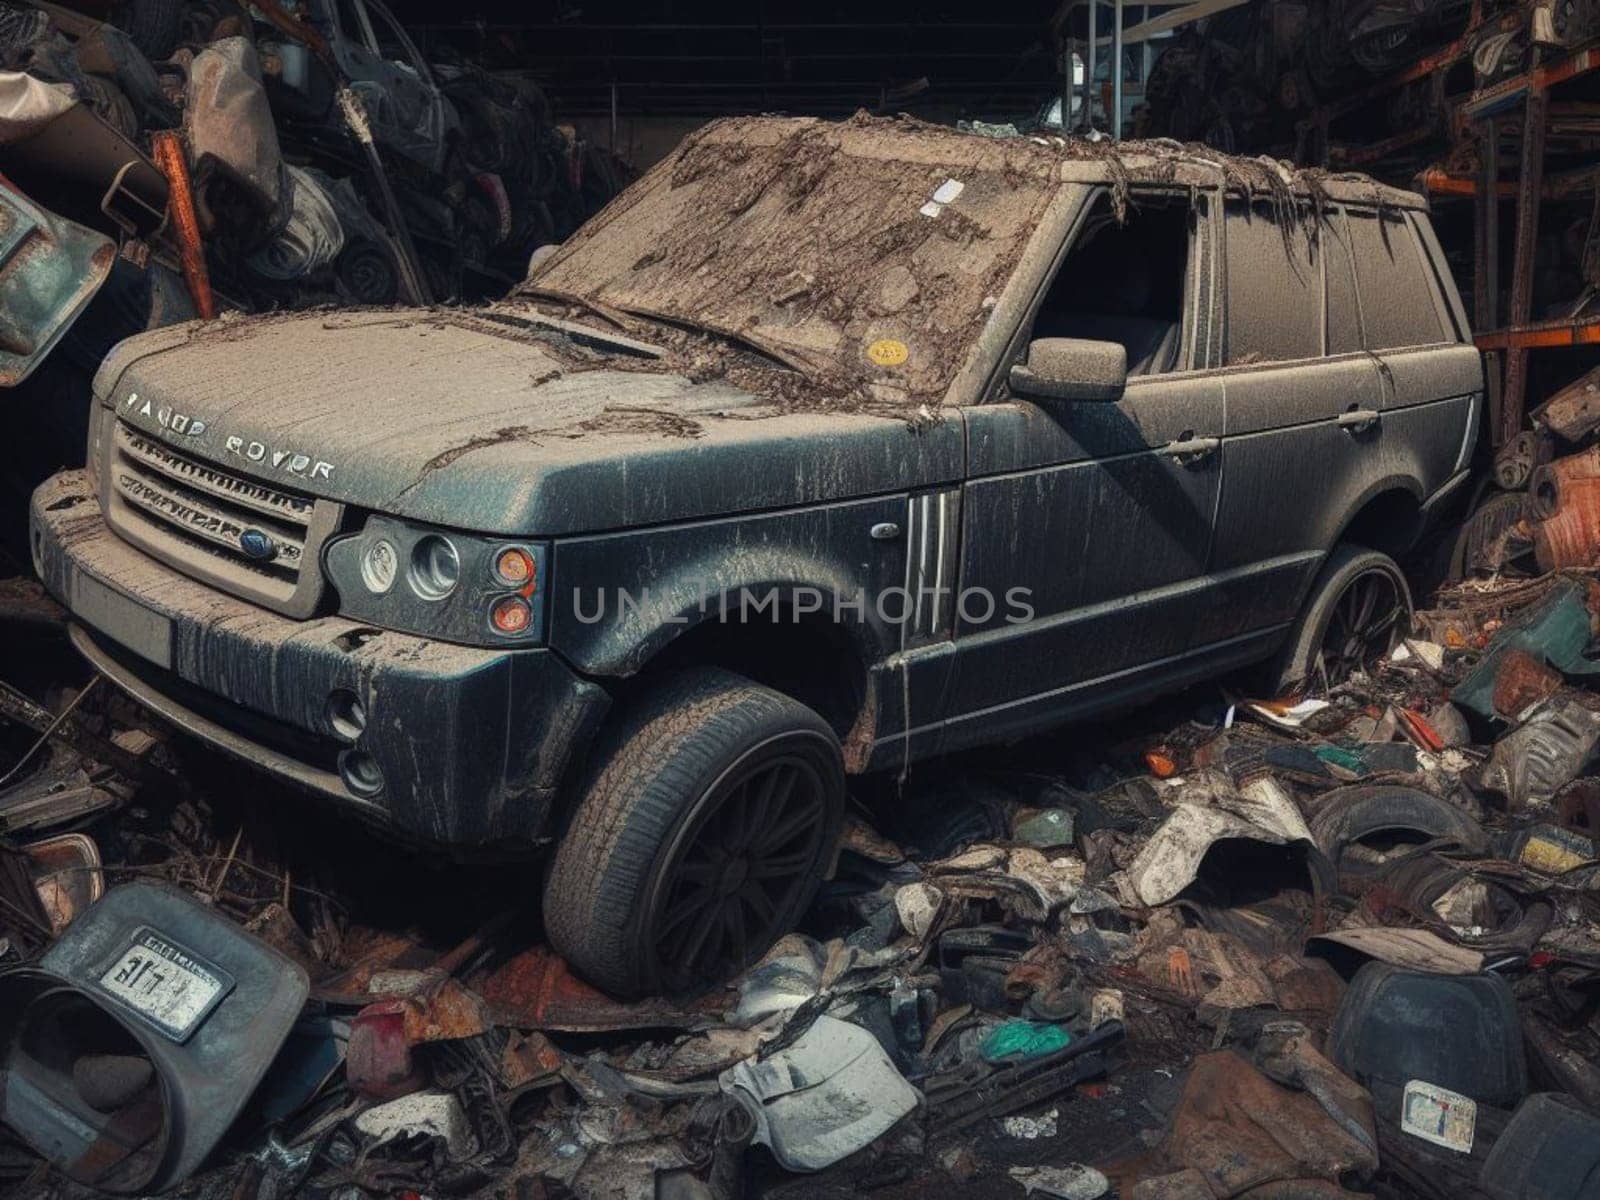 Crashed abandoned rusty expensive atmospheric suv as circulation banned for co2 emission 2030 agenda by verbano